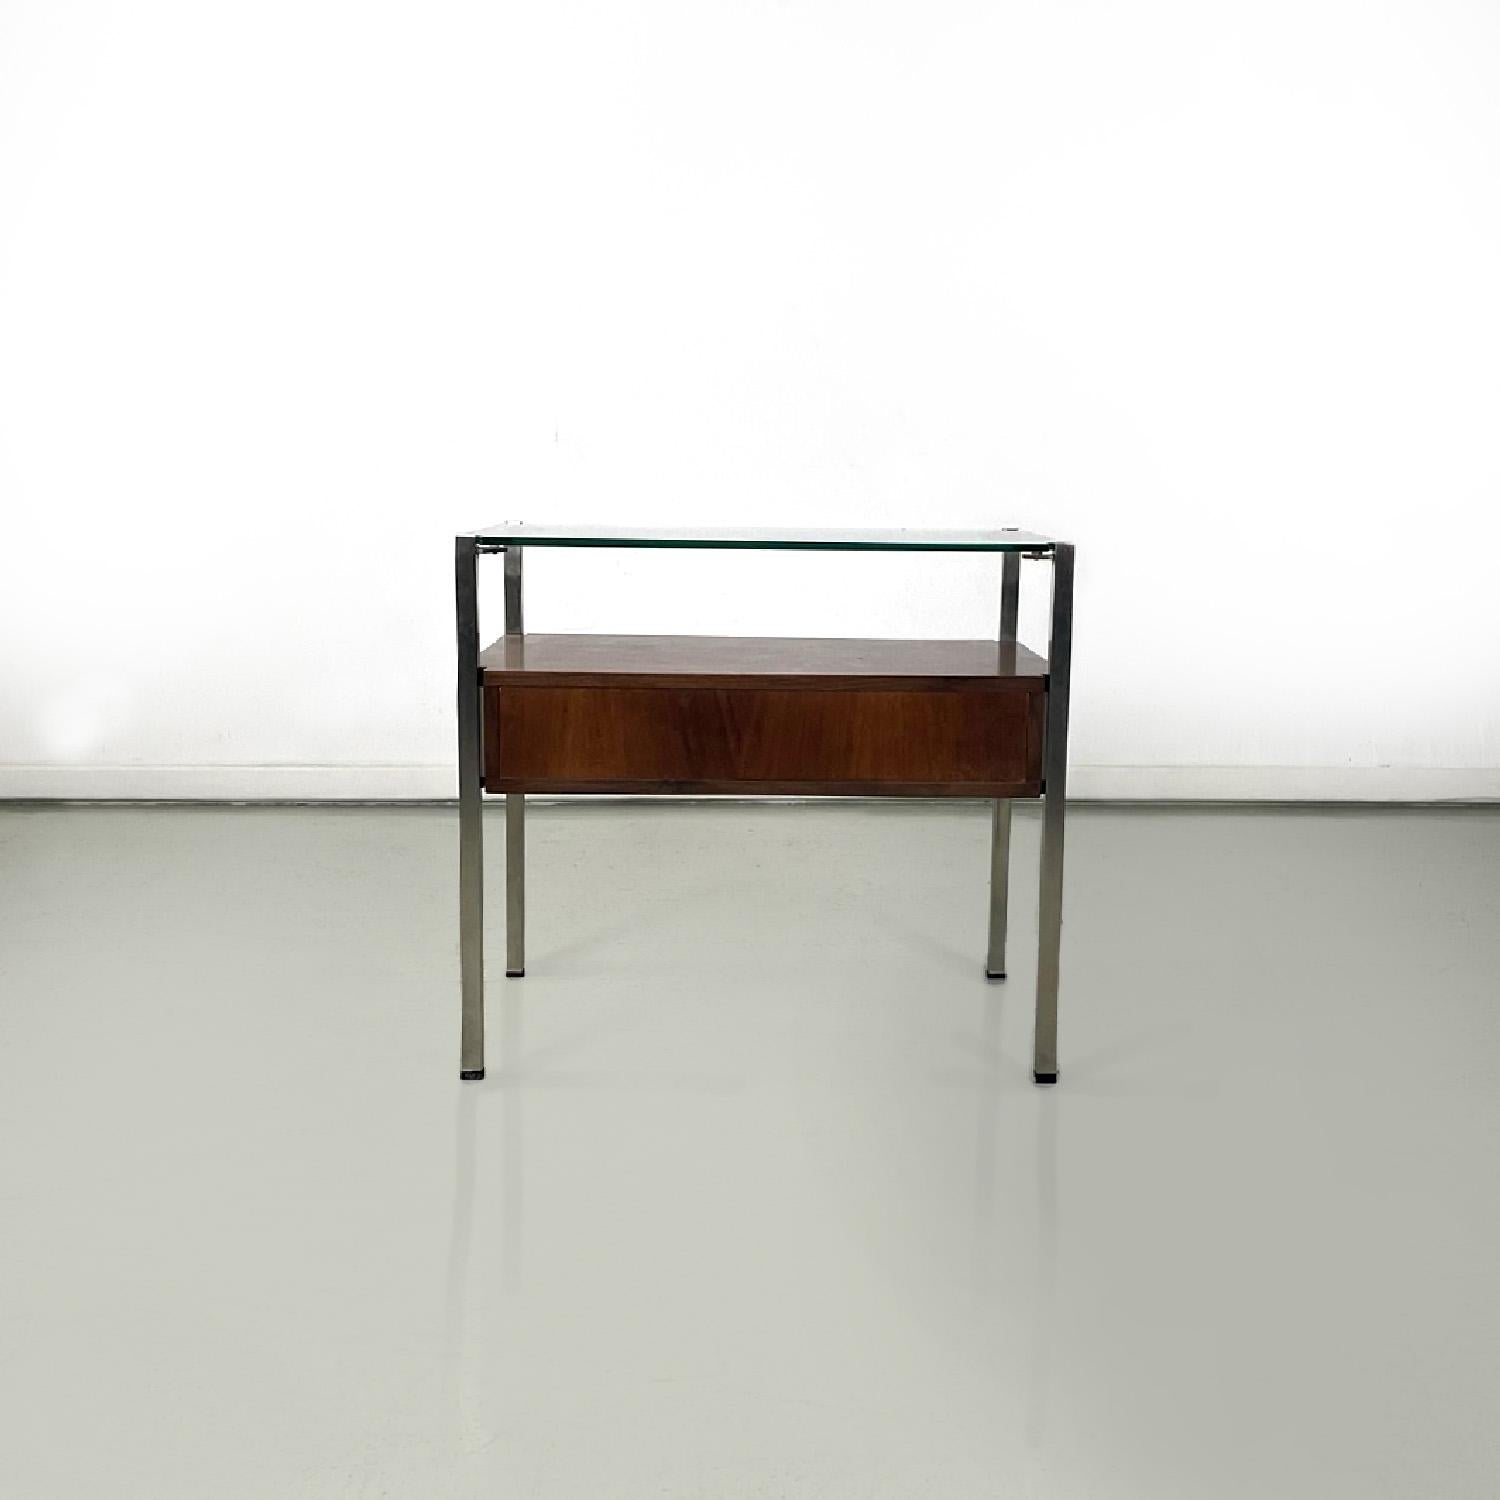 Late 20th Century Italian modern glass metal wood and light blue fabric bedside tables, 1970s For Sale